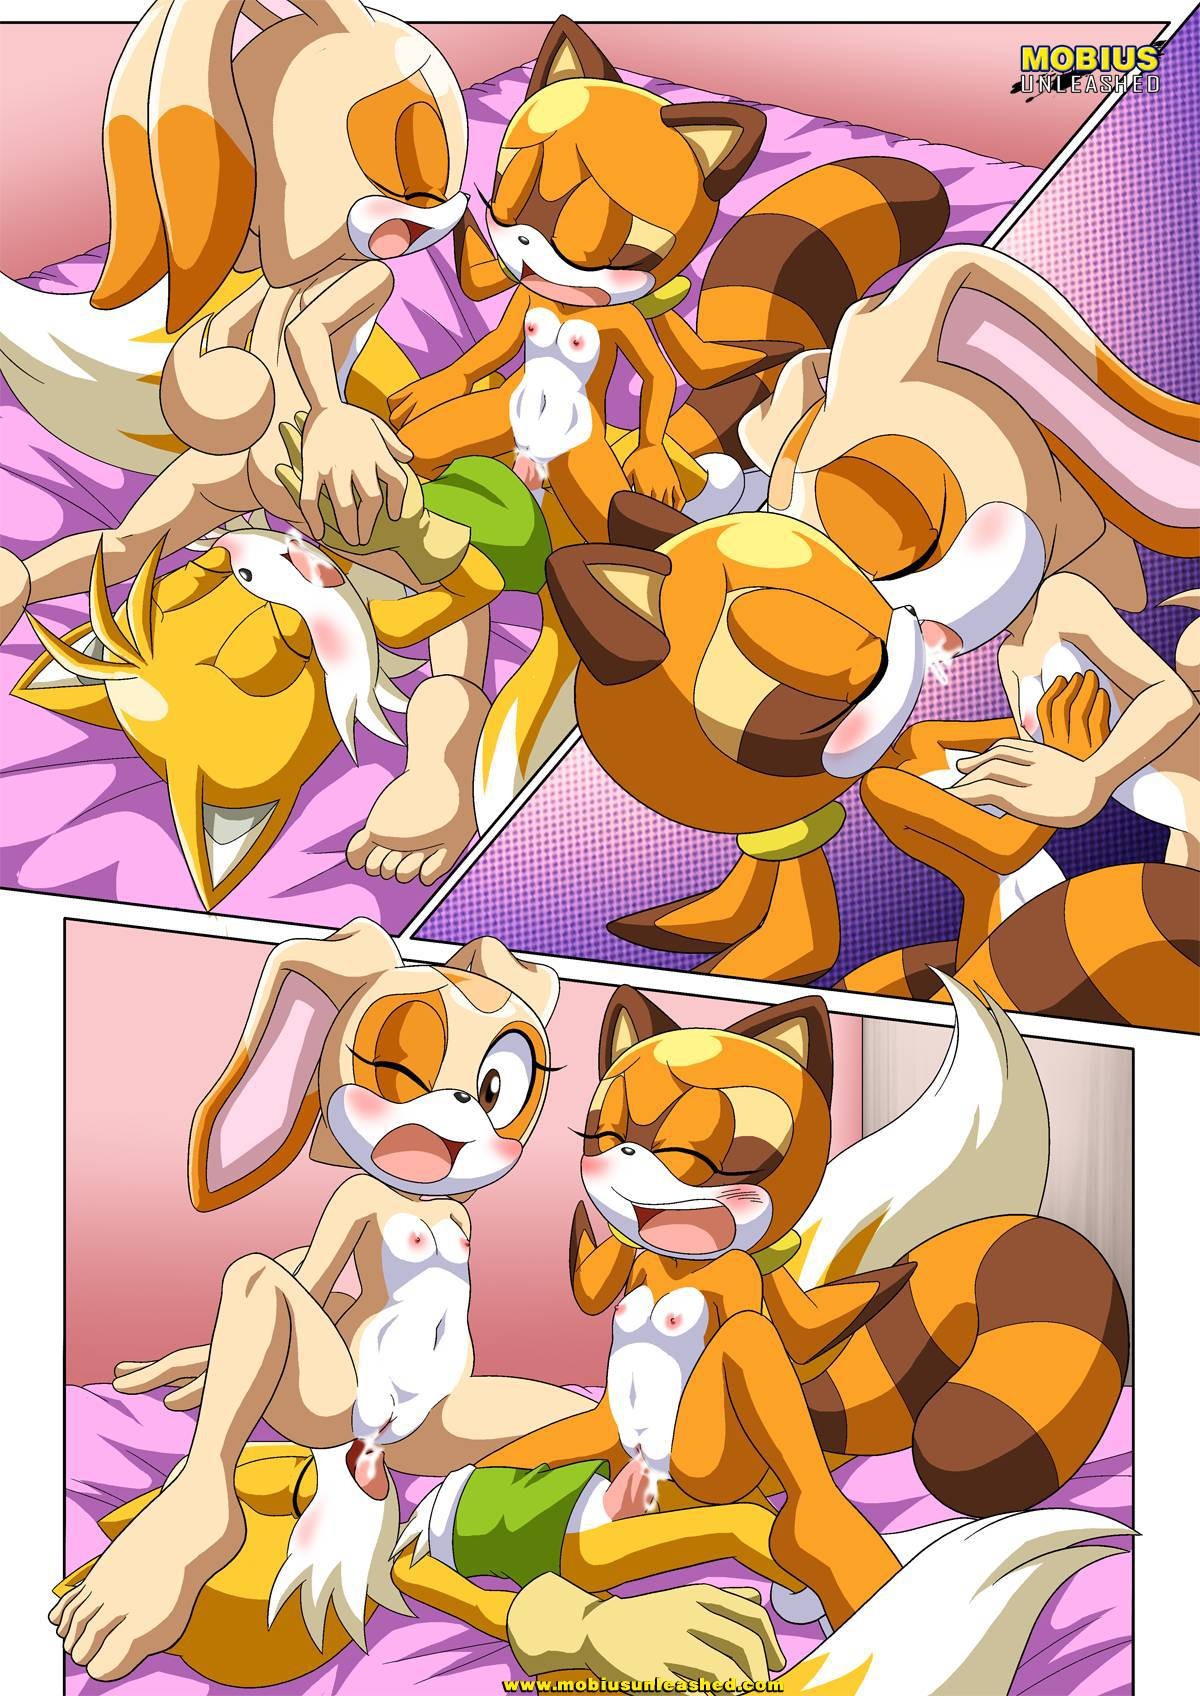 Tails and Cream - 10